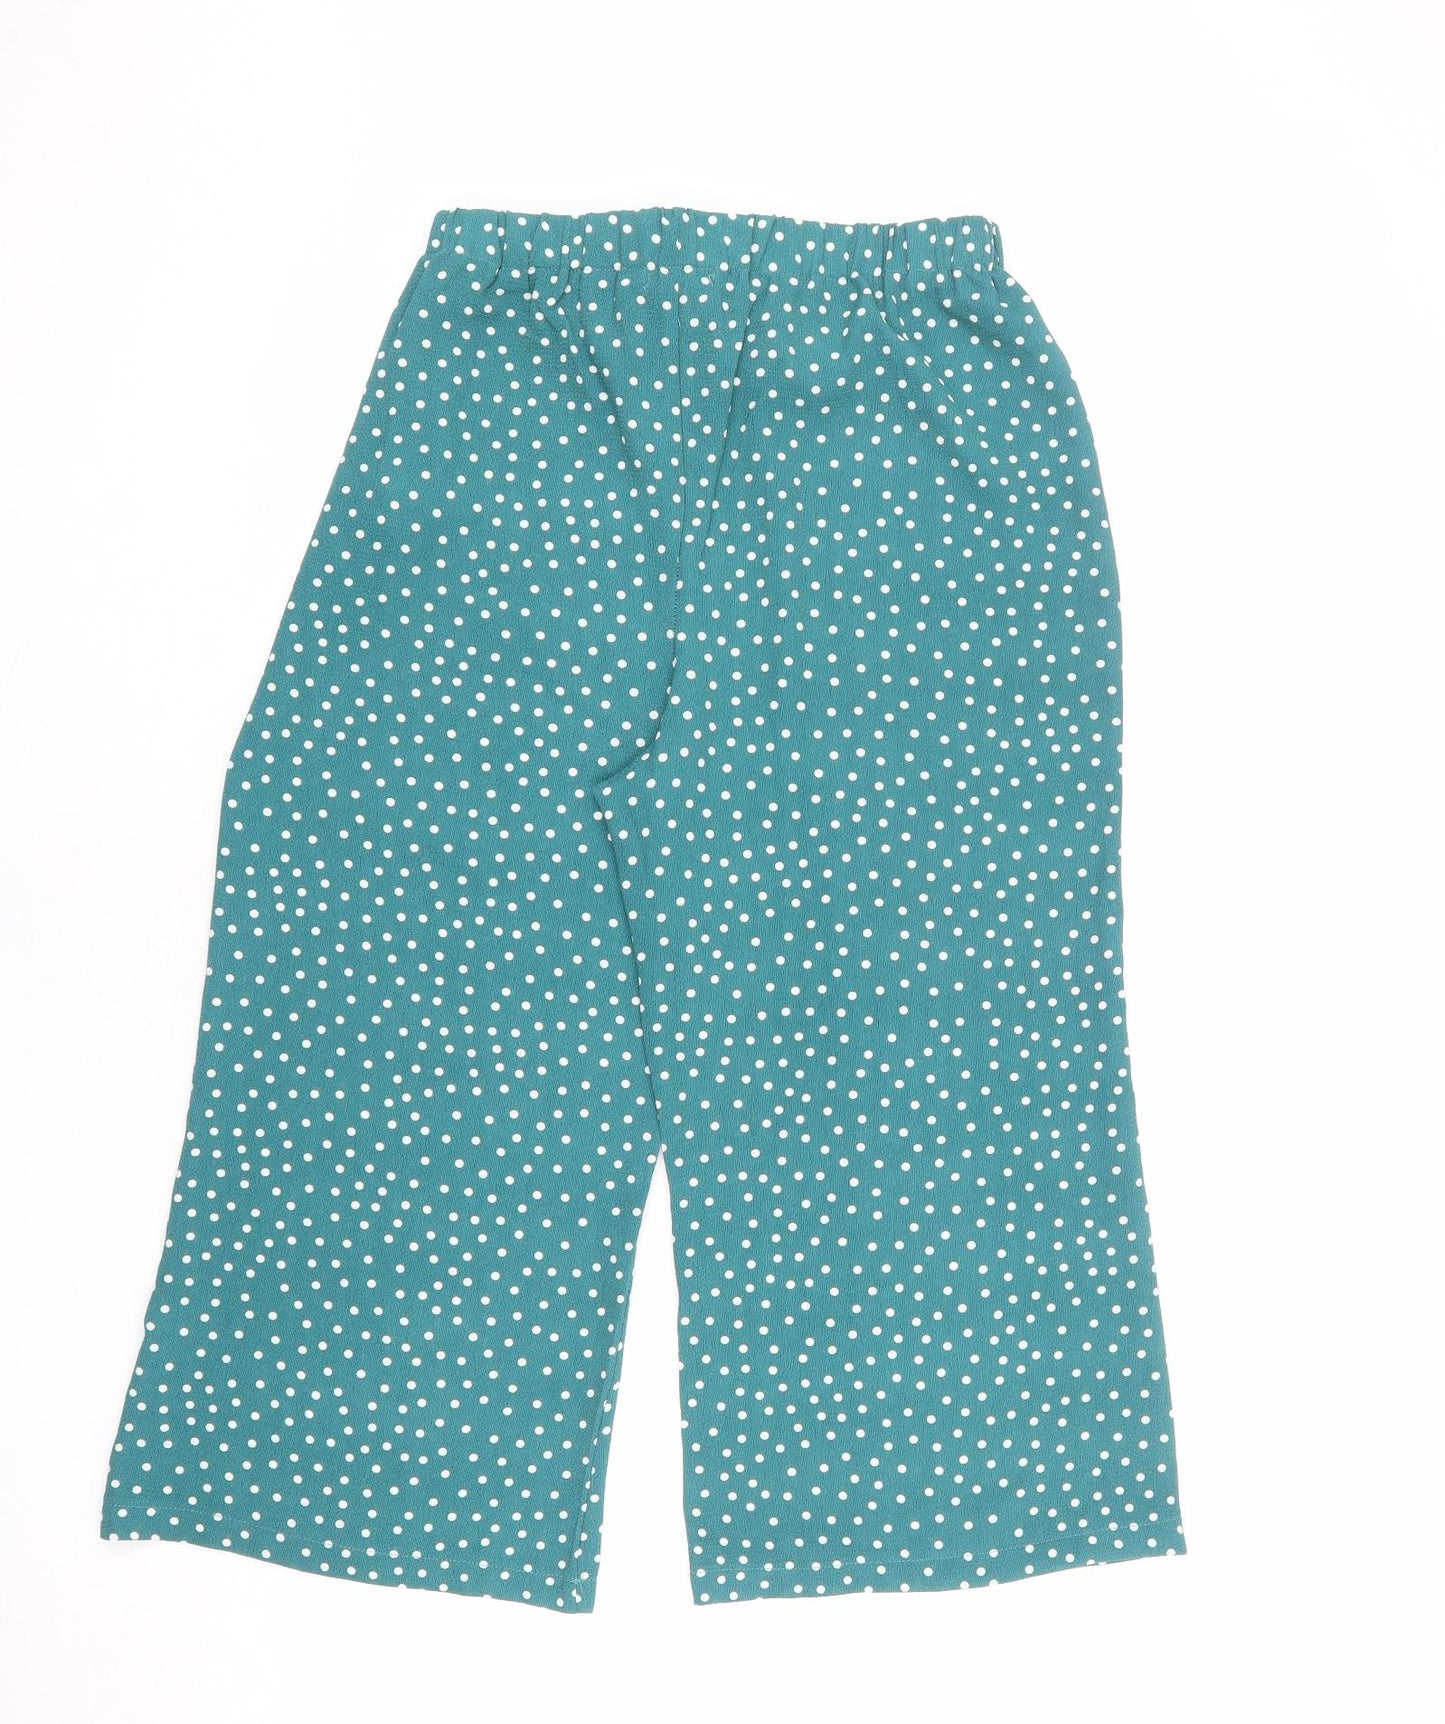 Boohoo Womens Green Polka Dot Polyester Trousers Size 12 L20 in Regular